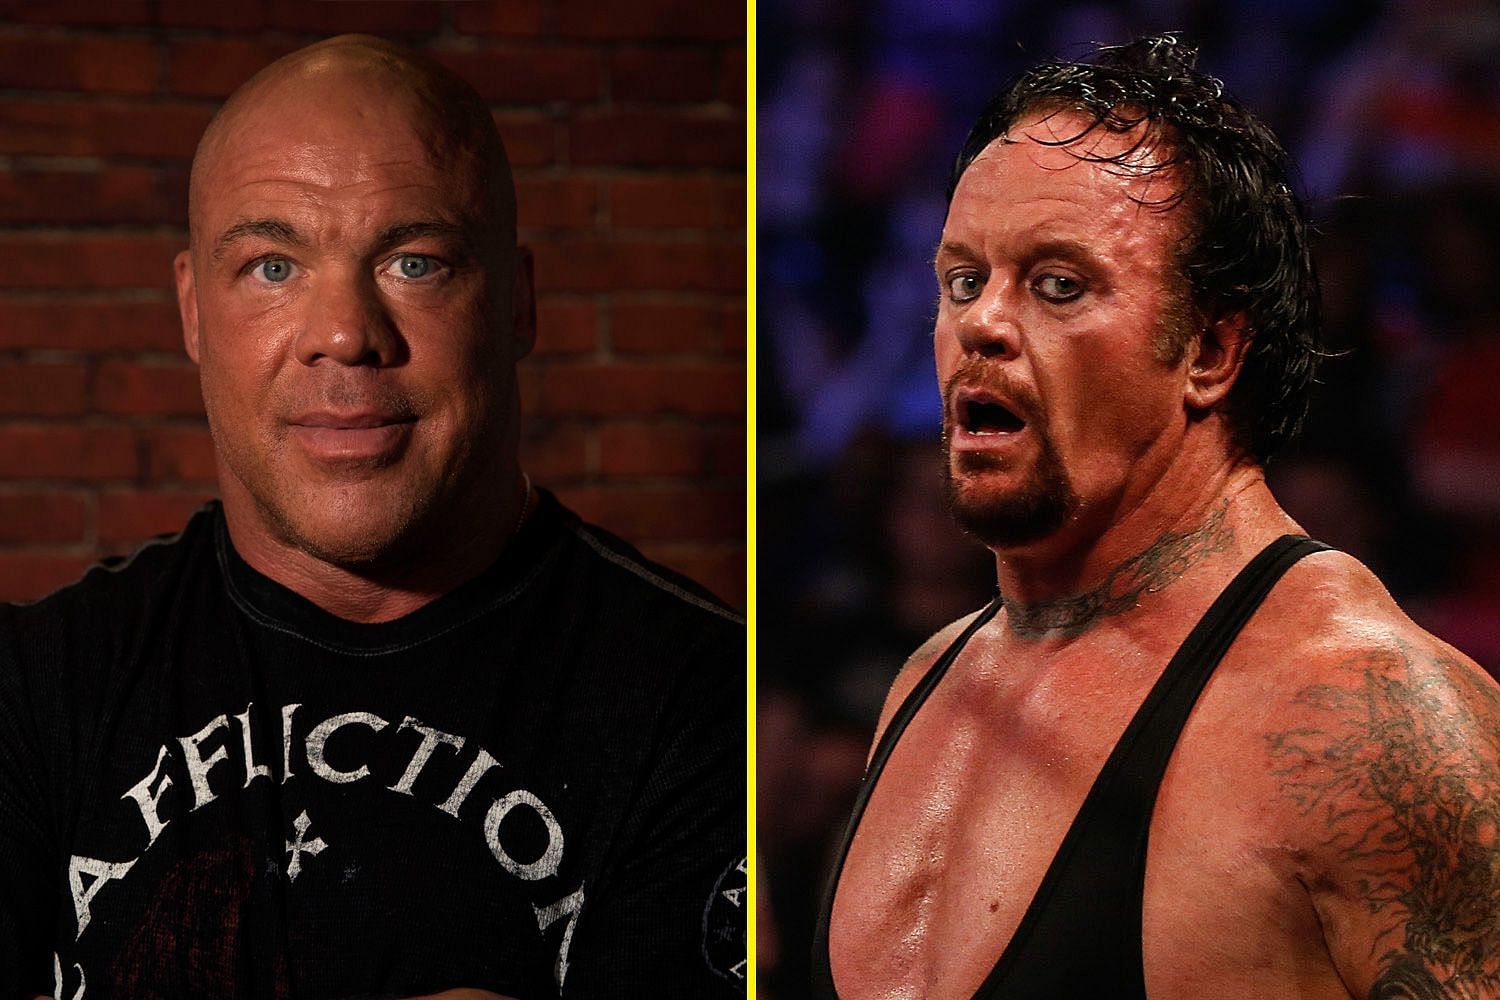 The Undertaker and Kurt Angle were involved in an infamous scuffle with Vince McMahon